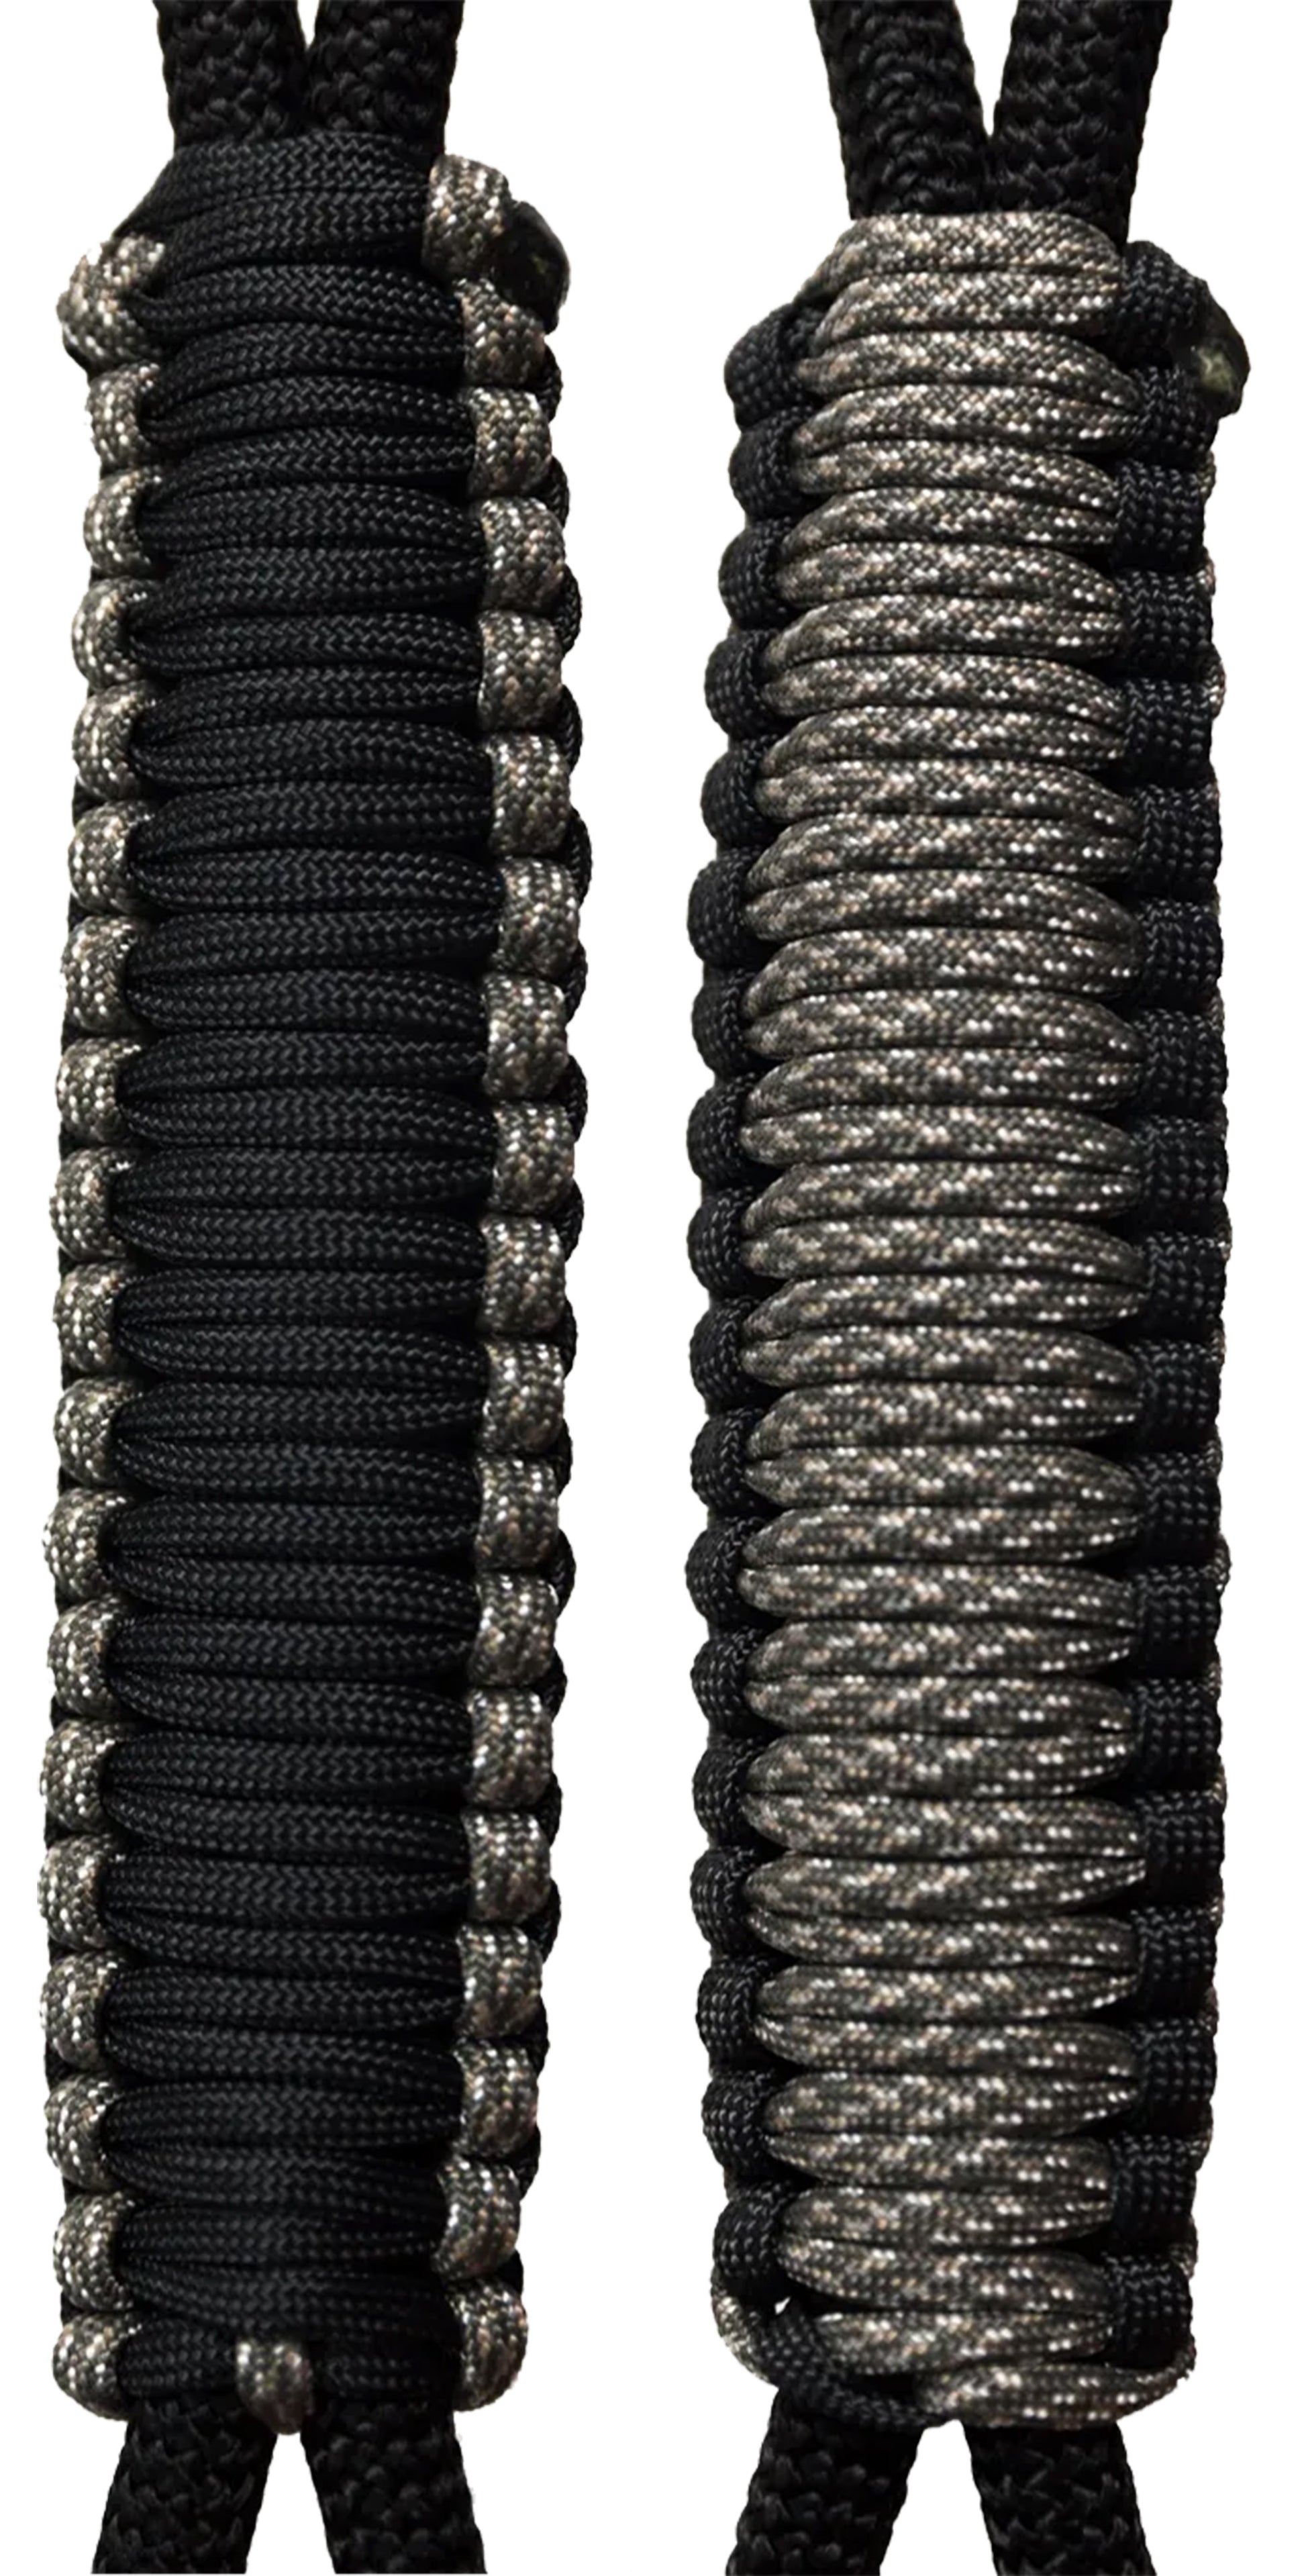 Black & Digi Camo C031C037  Paracord Handmade Handles for Stainless Steel Tumblers - Made in USA!